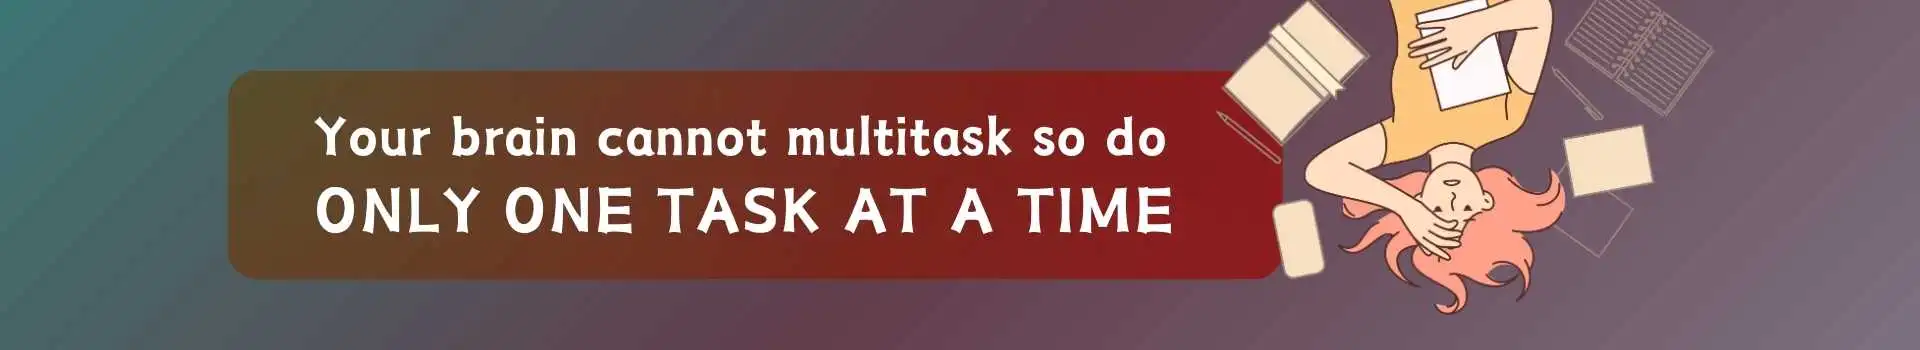 Your brain cannot multitask. So do only one task at a time ytthumbnail